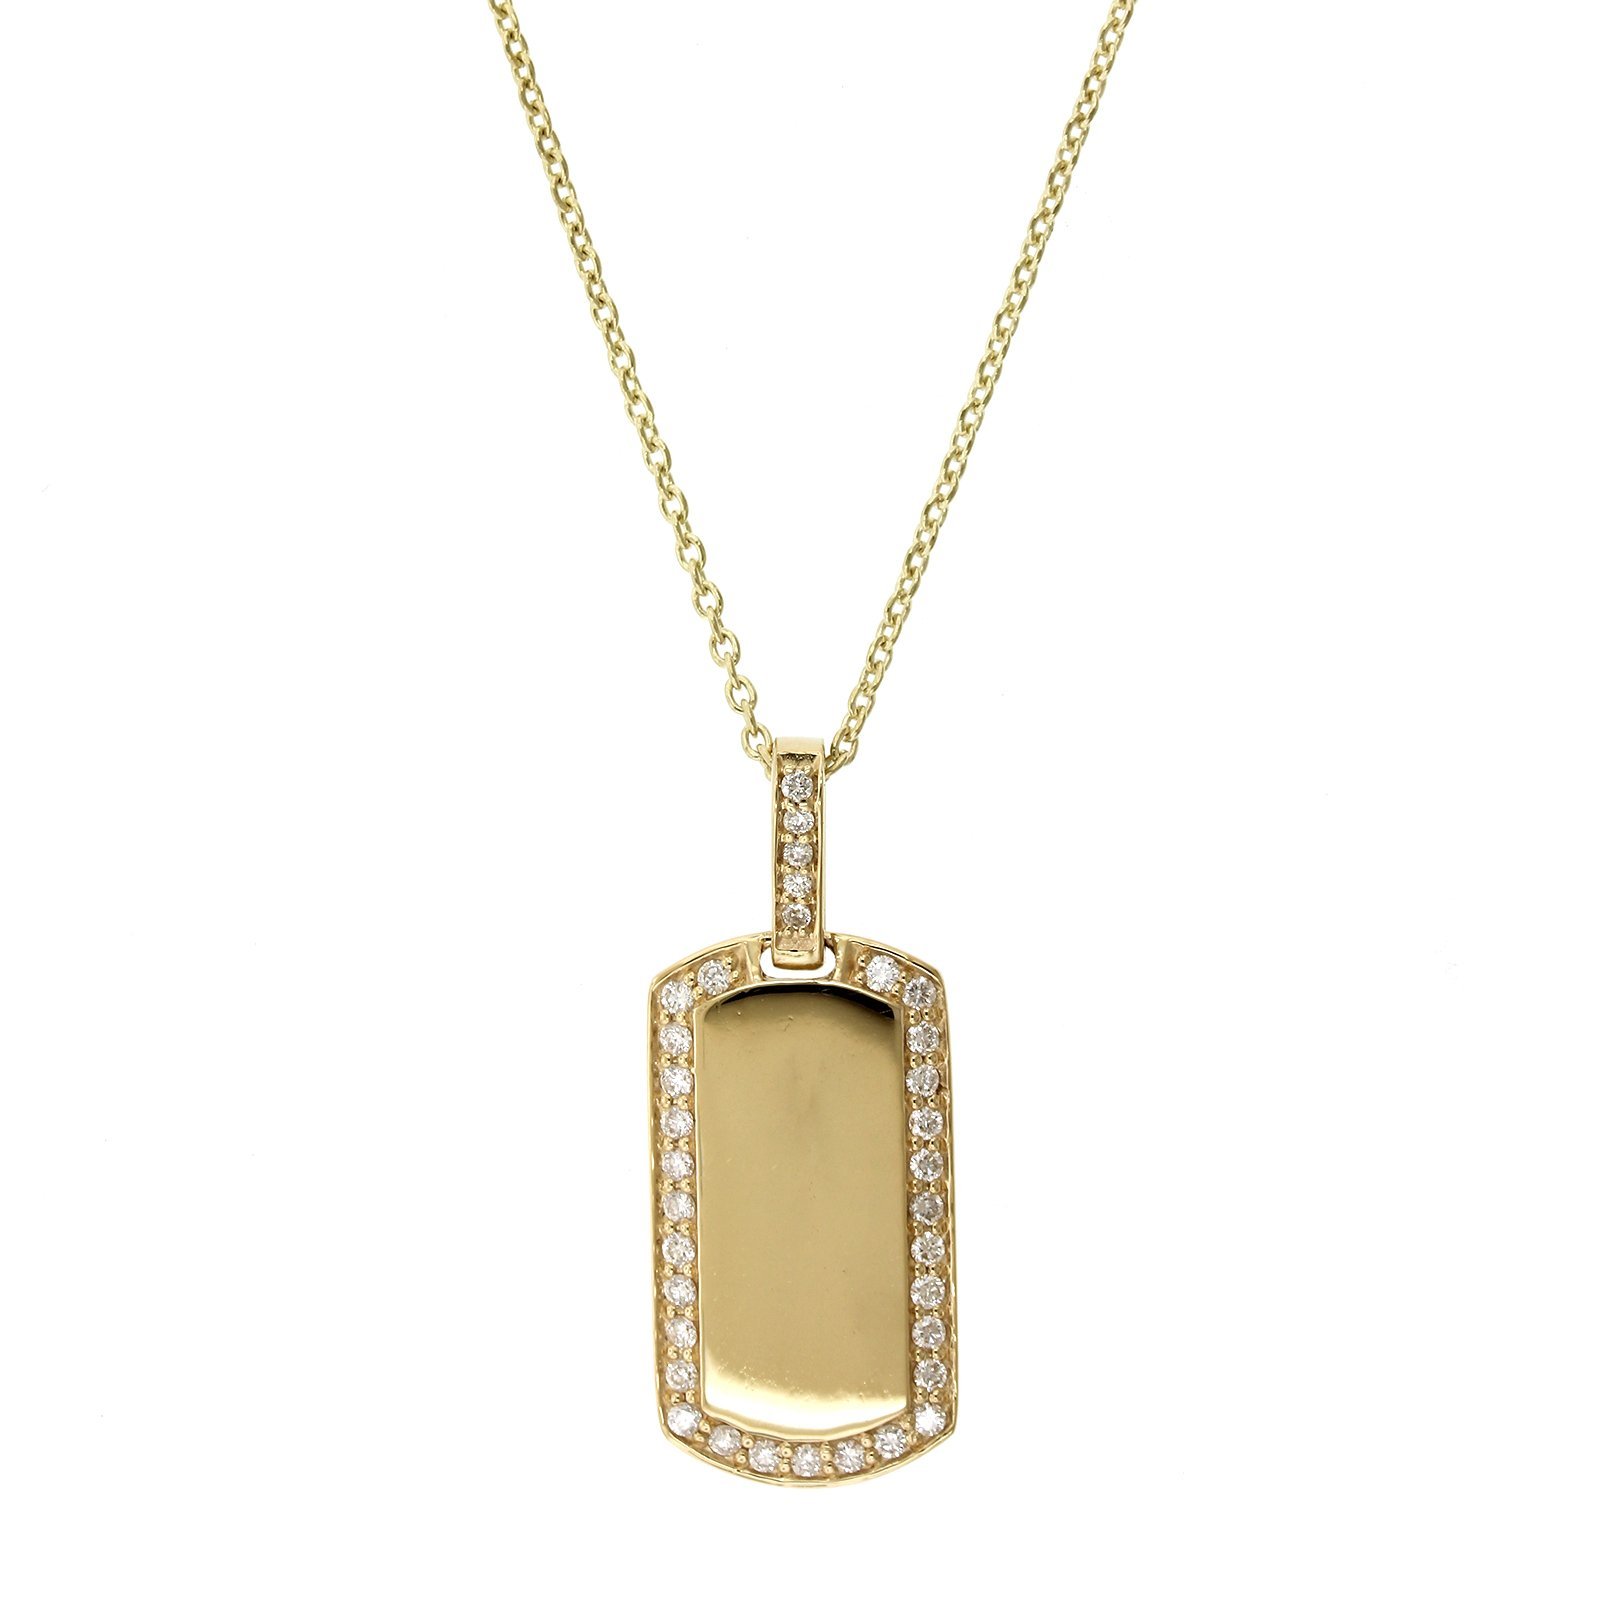 The-Isla-14k-Yellow-Gold-Diamond-Dog-Tag-Engravable-Necklace-front-DFP4405.jpeg